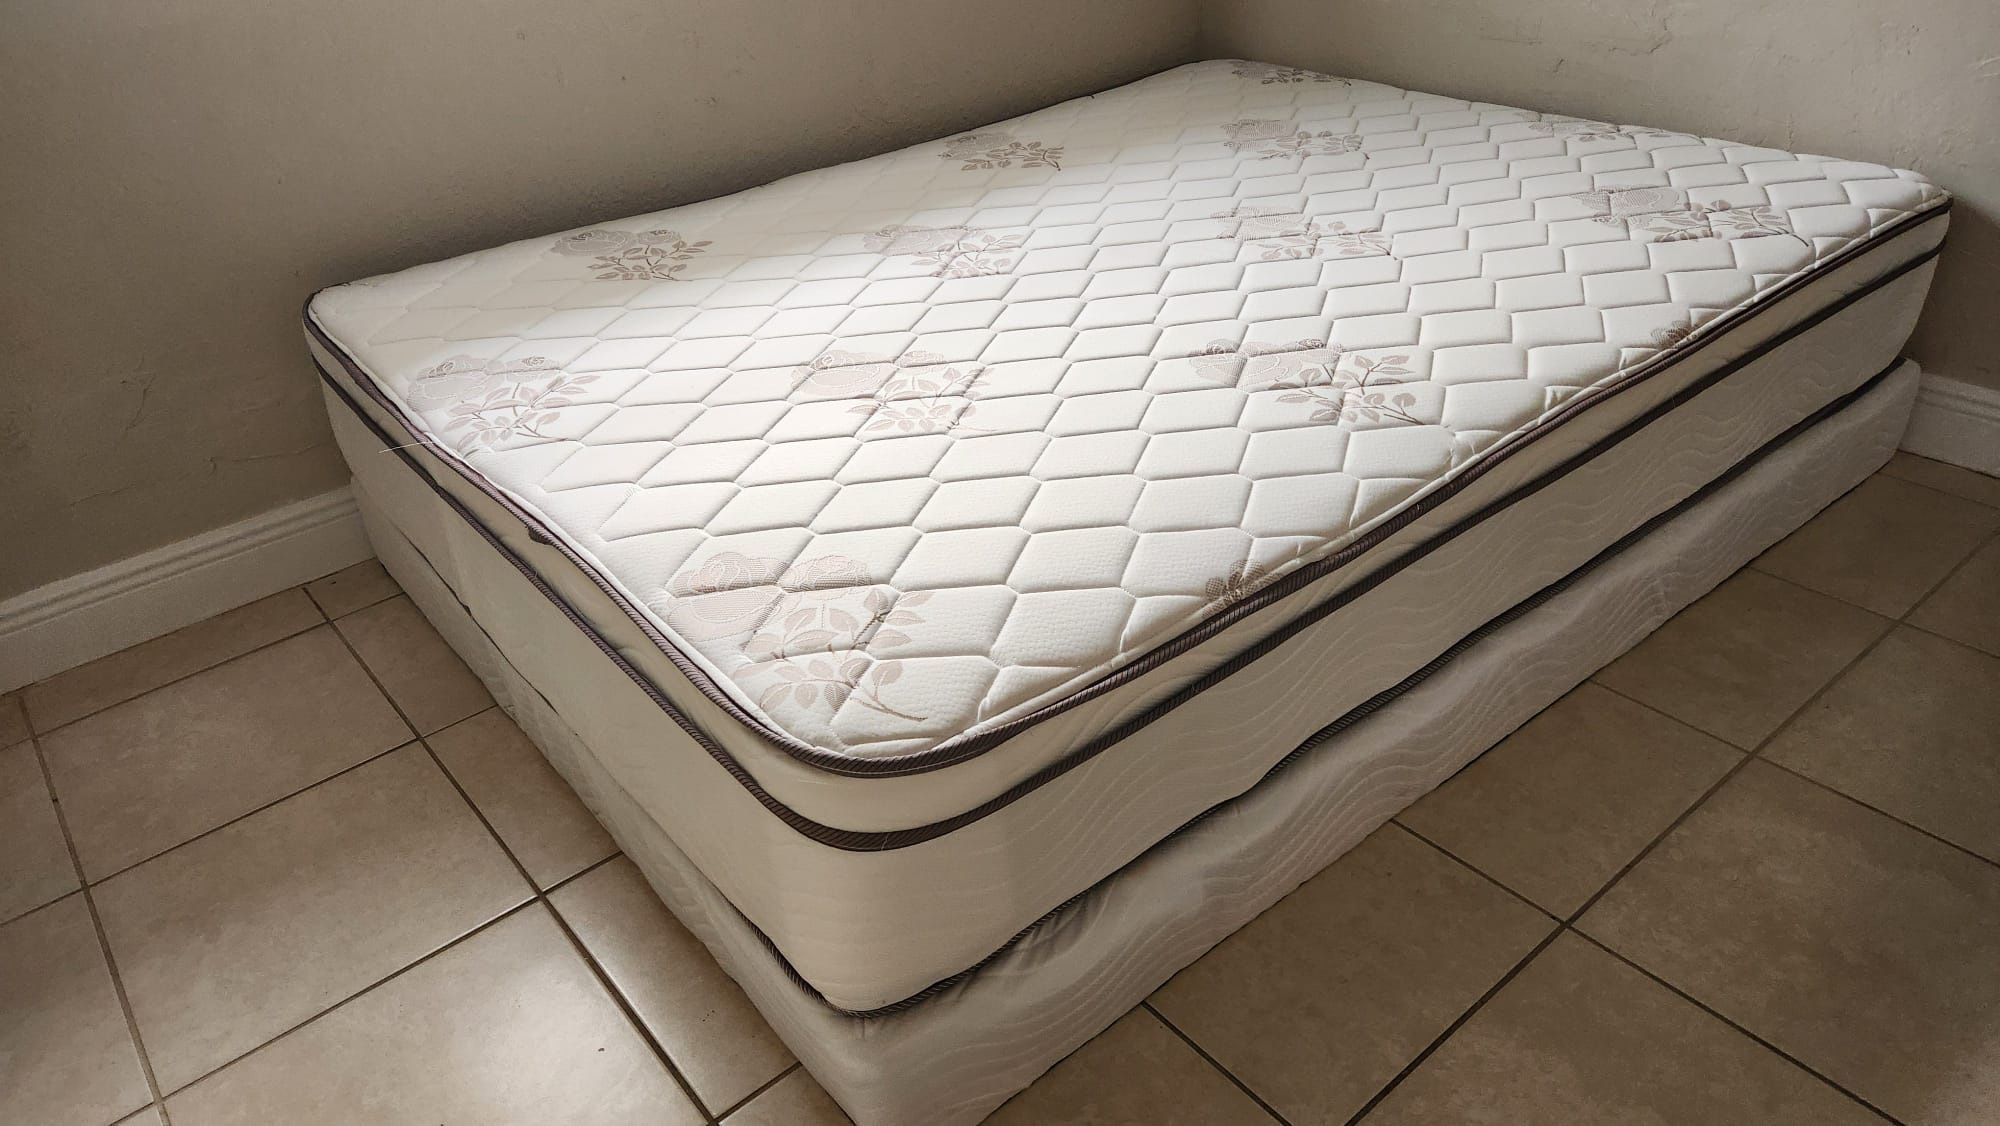 New King Mattress And Box Springs Bed Frame Is Not Included 